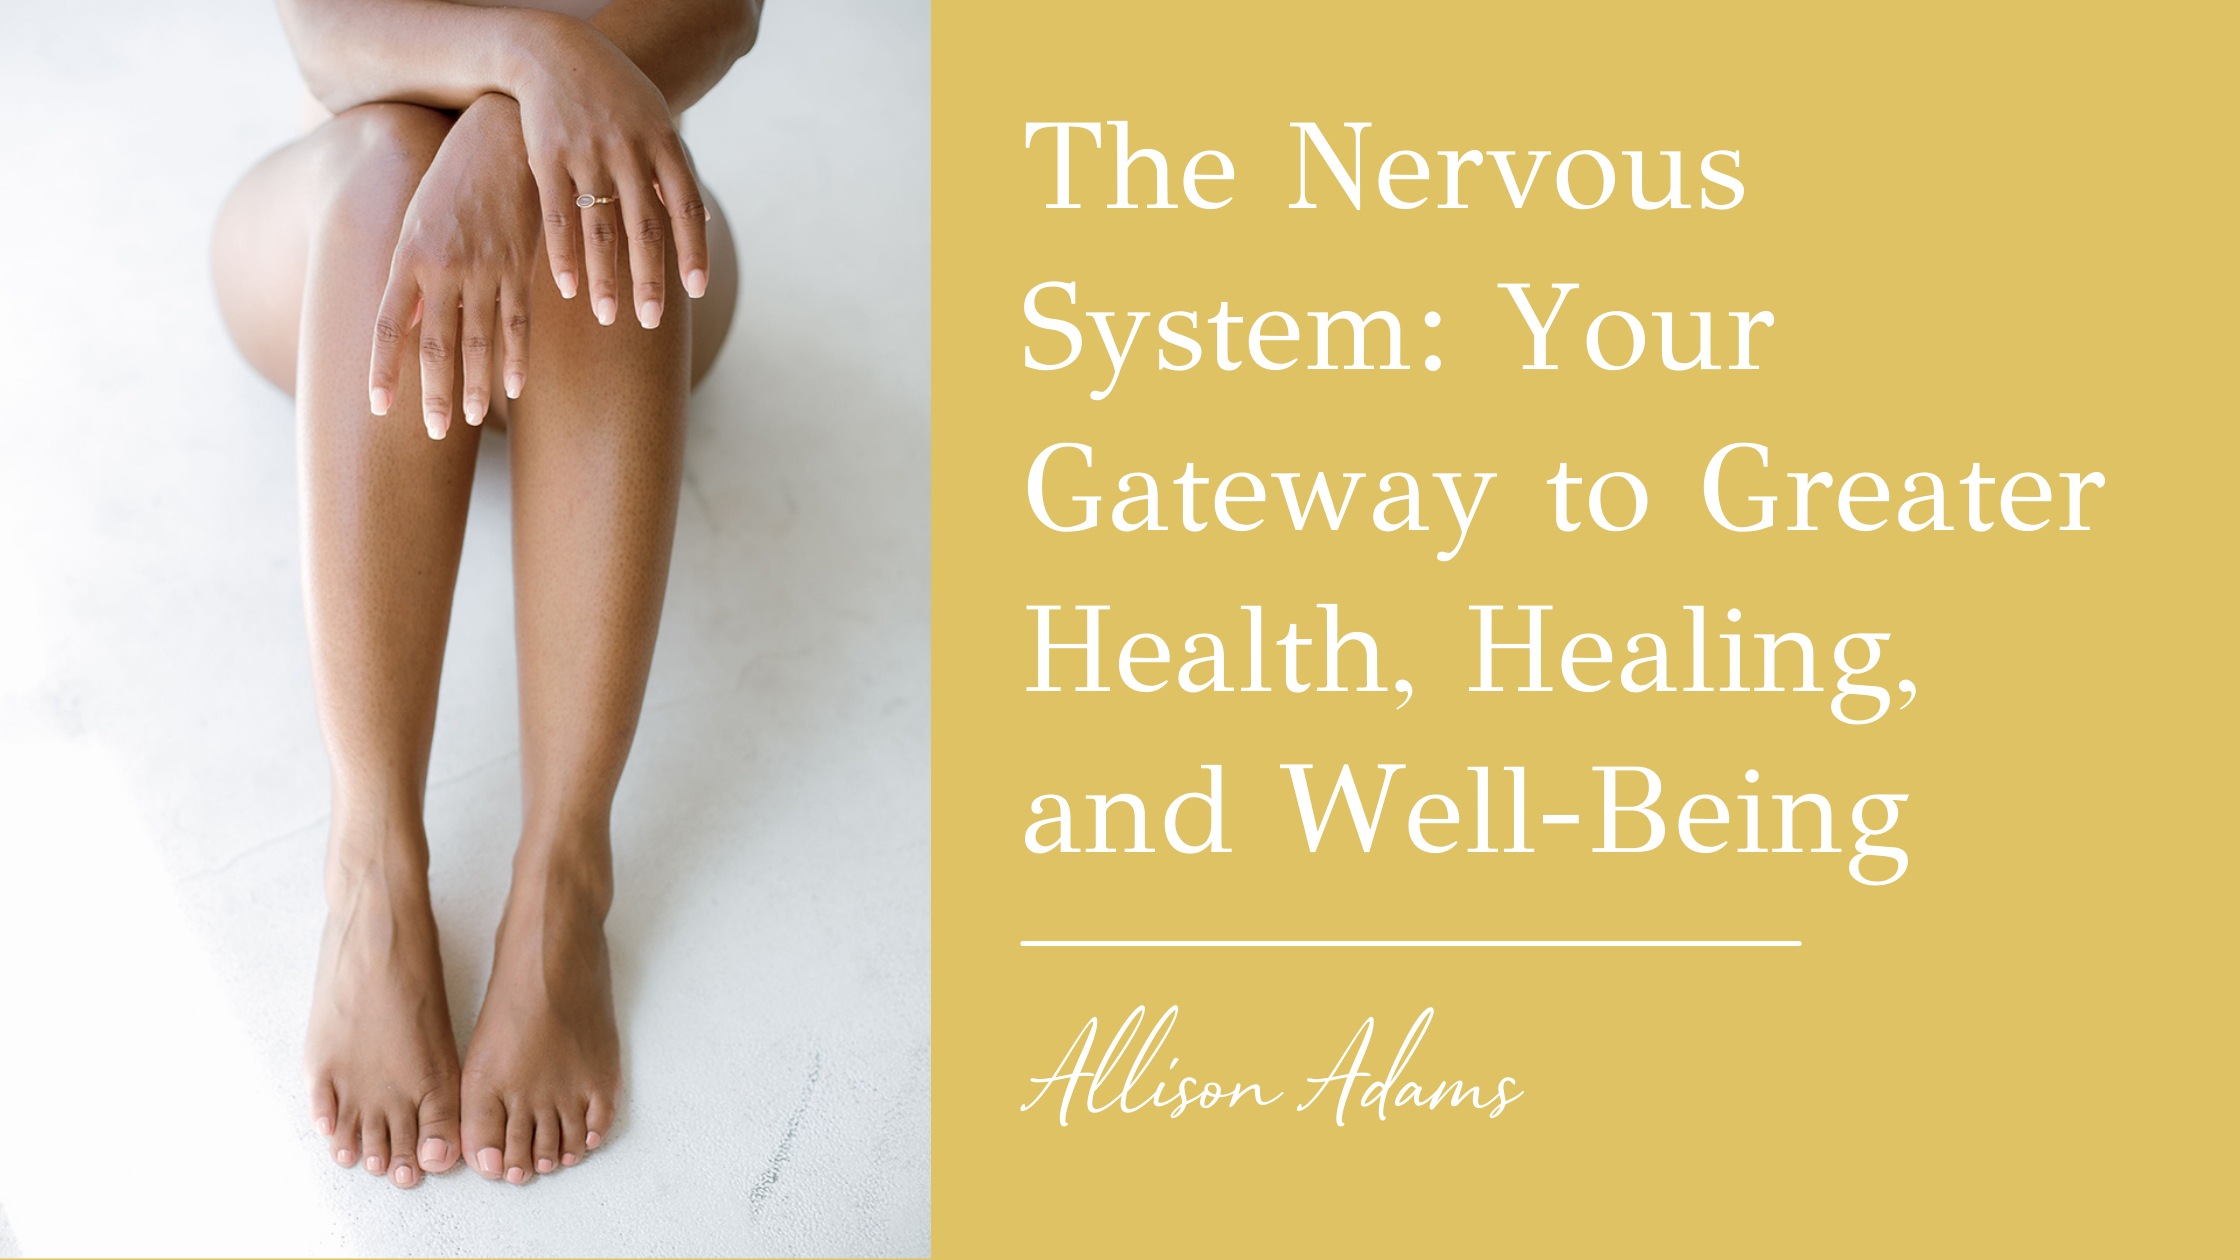 The Nervous System: Your Gateway to Greater Health, Healing, and Well-Being